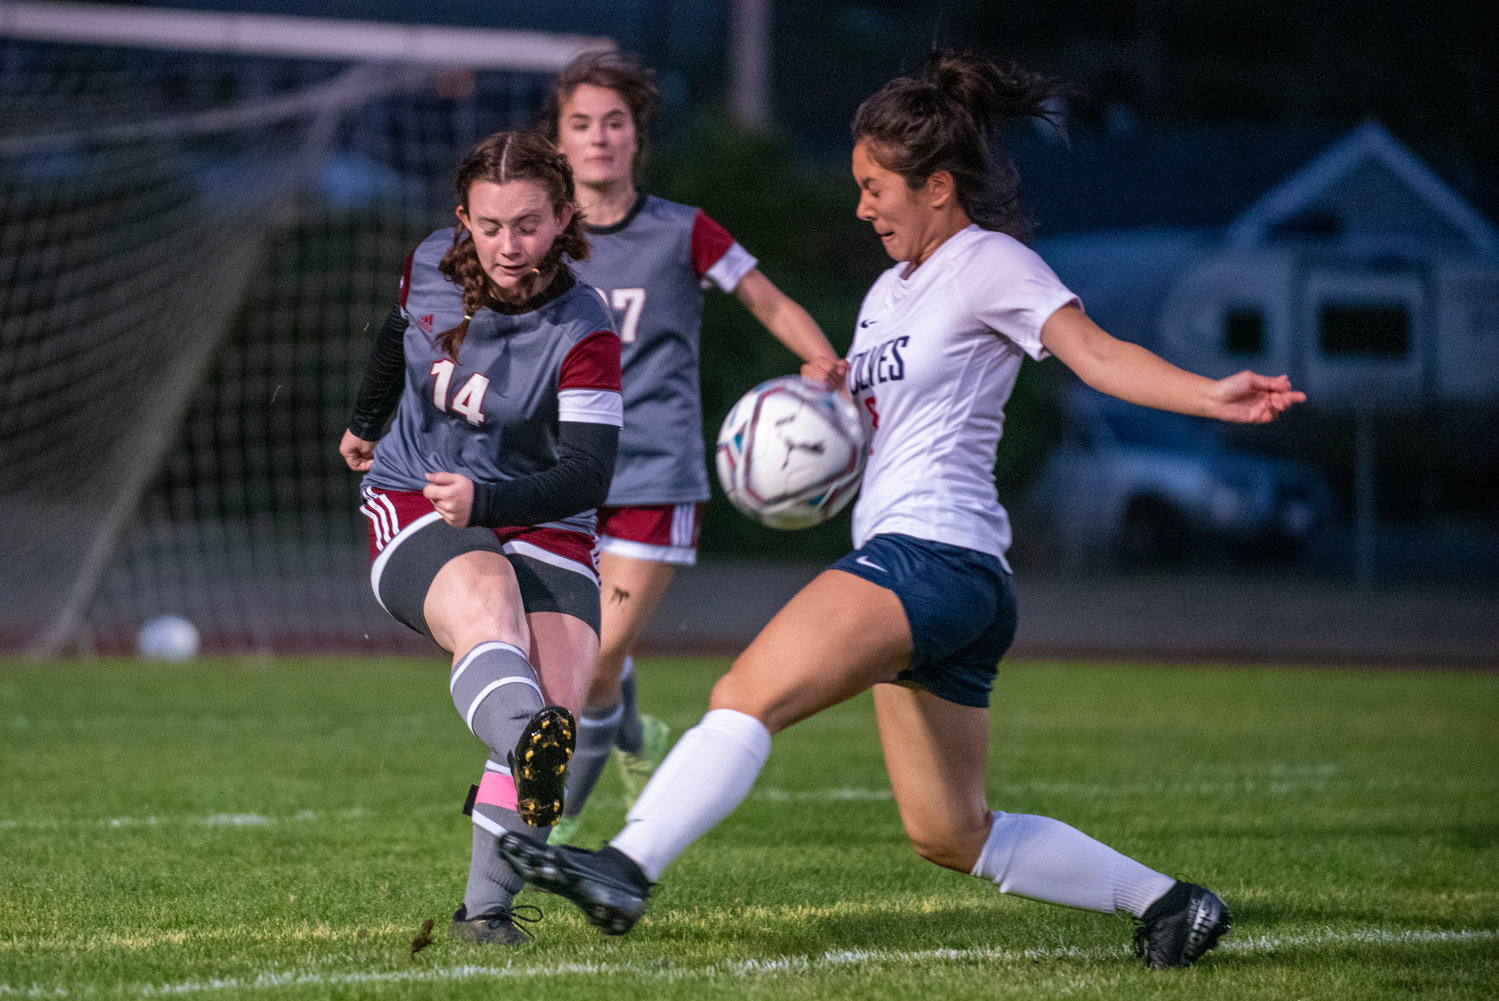 W.F. West's Madeline Shields (14) clears a ball past a Black Hills player on Tuesday at home.